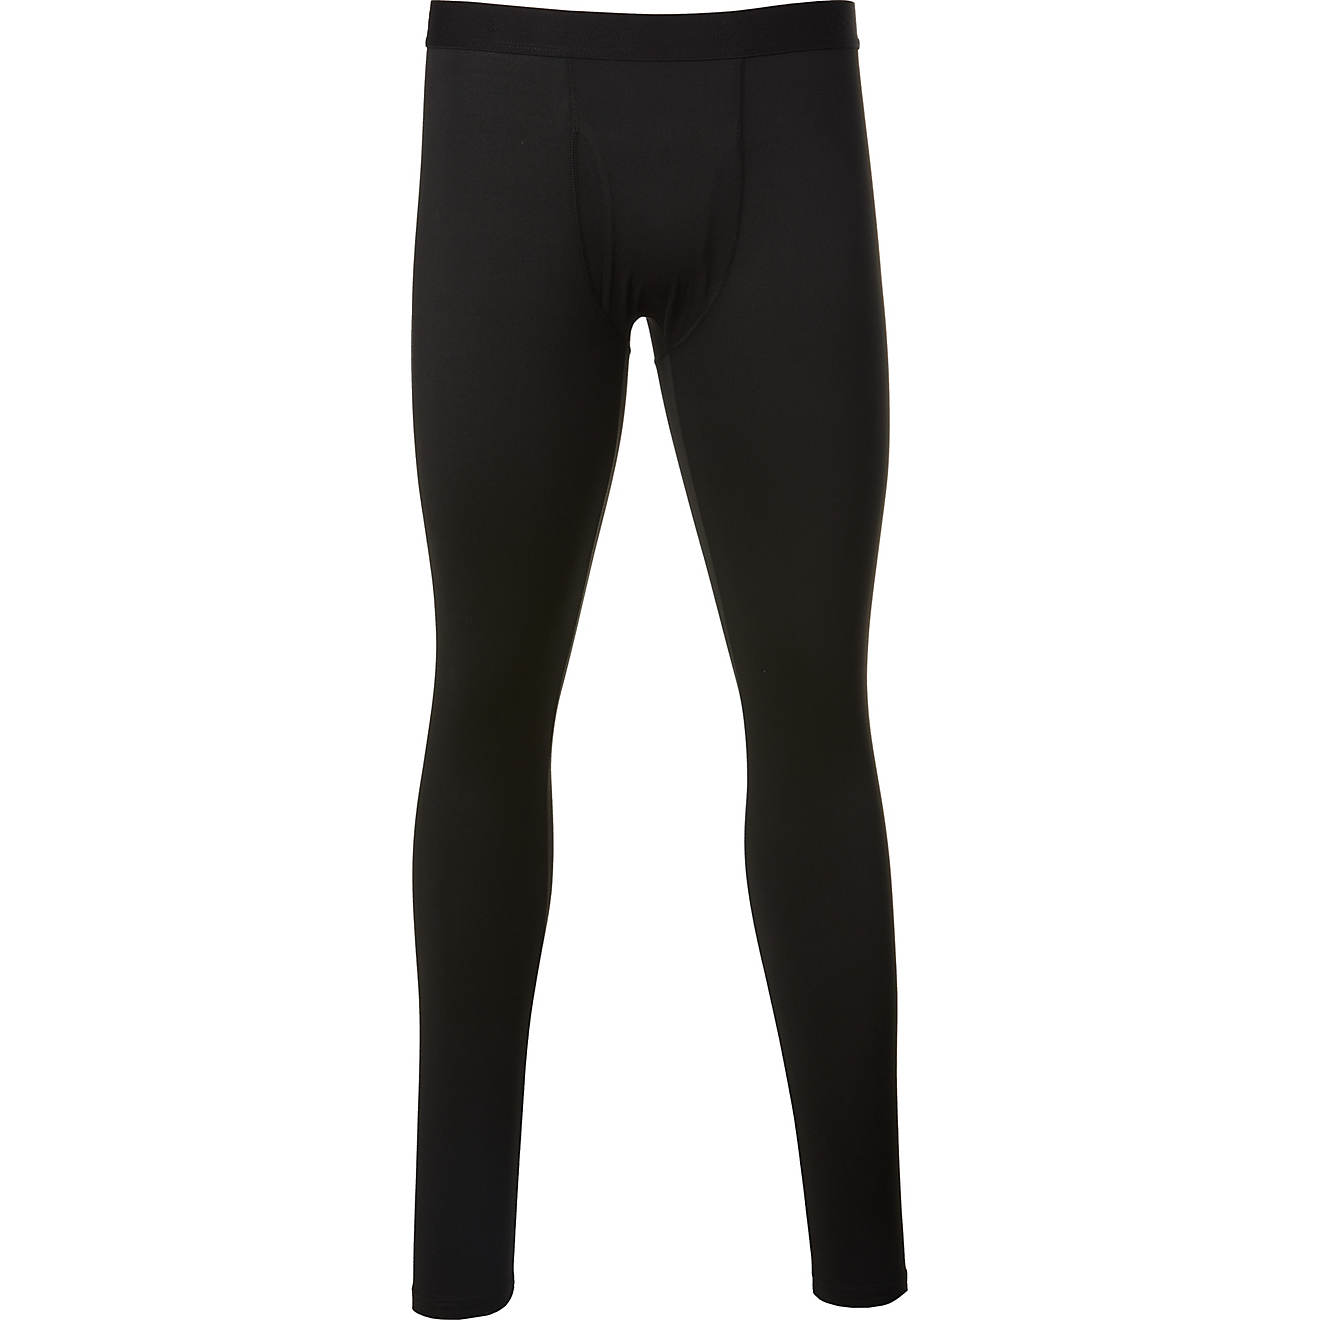 Magellan Outdoors Men's Baselayer 2.0 Thermal Stretch Pants                                                                      - view number 1